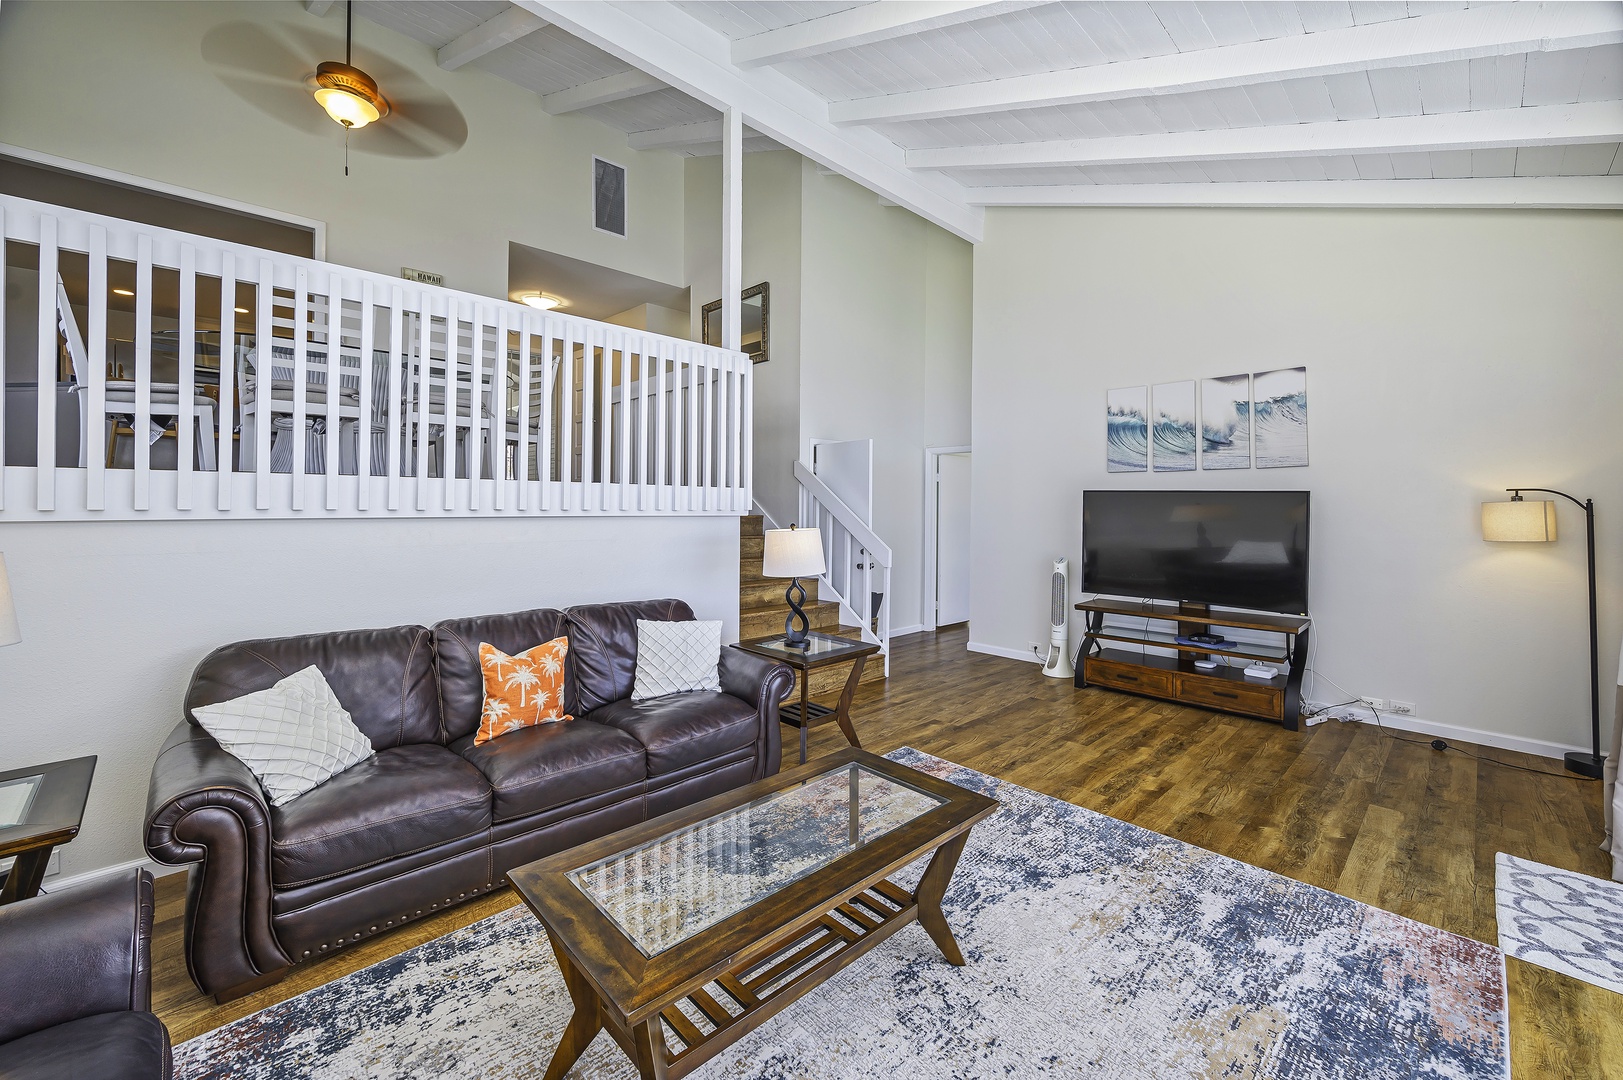 Honolulu Vacation Rentals, Hale Malia - Gather with family and friends for a movie night or catch up on your favorite shows together